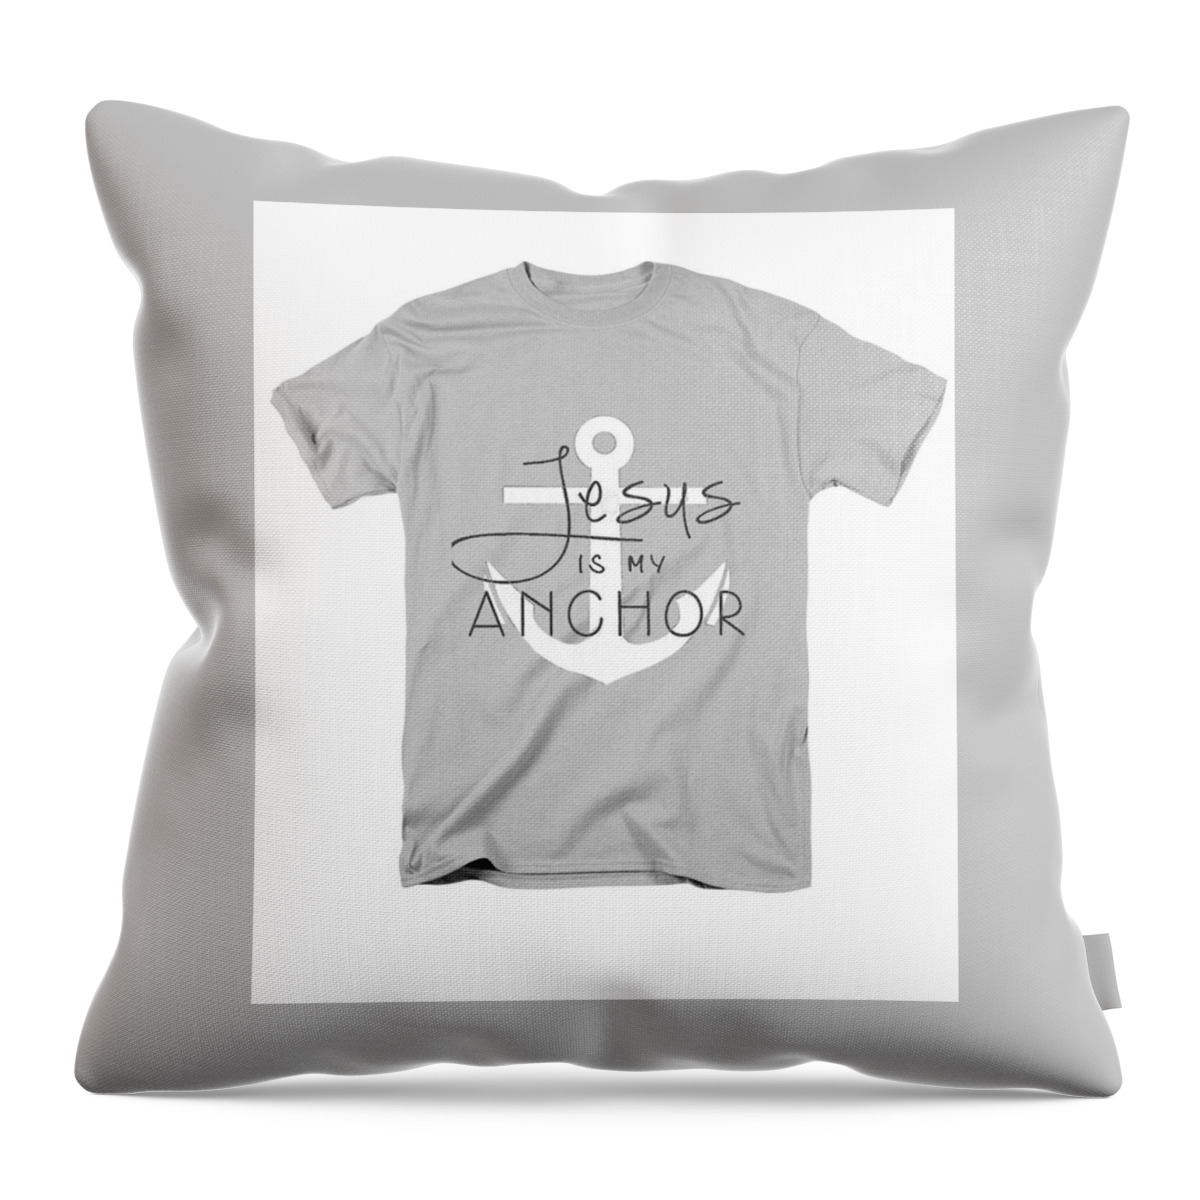  Throw Pillow featuring the painting My Anchor by Herb Strobino